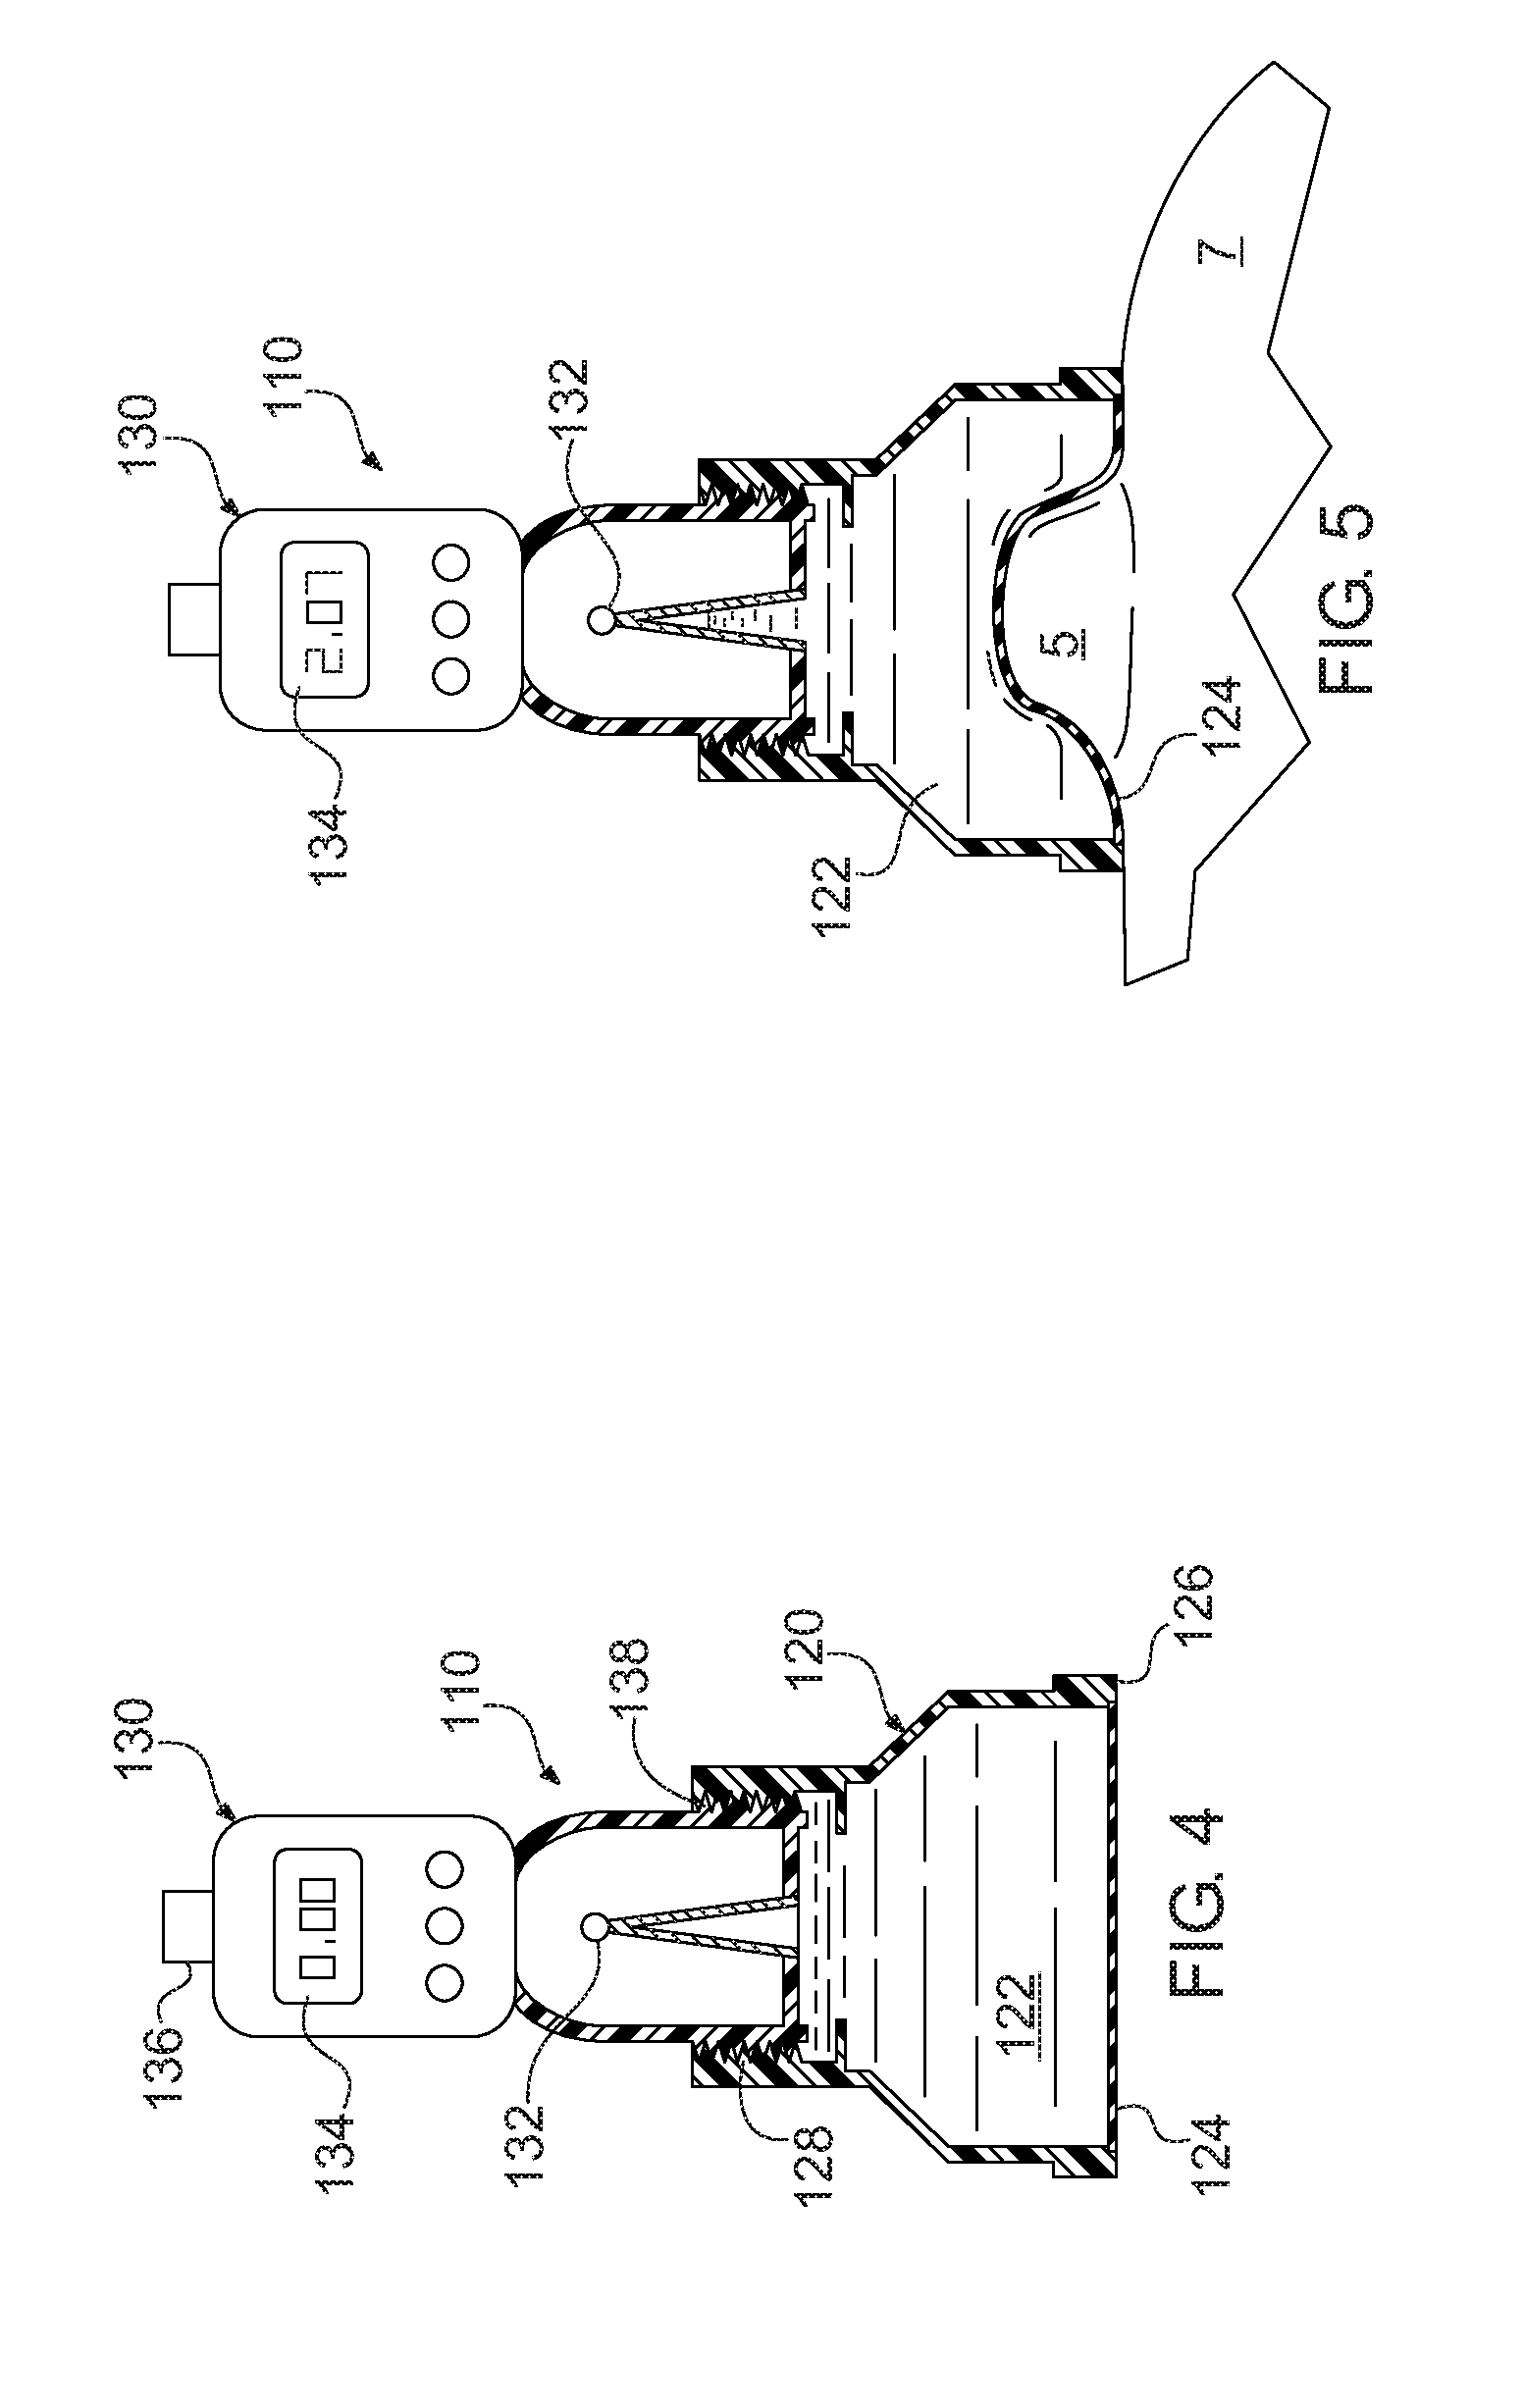 Method and Apparatus for Measuring Volume of Subcutaneous Tumors